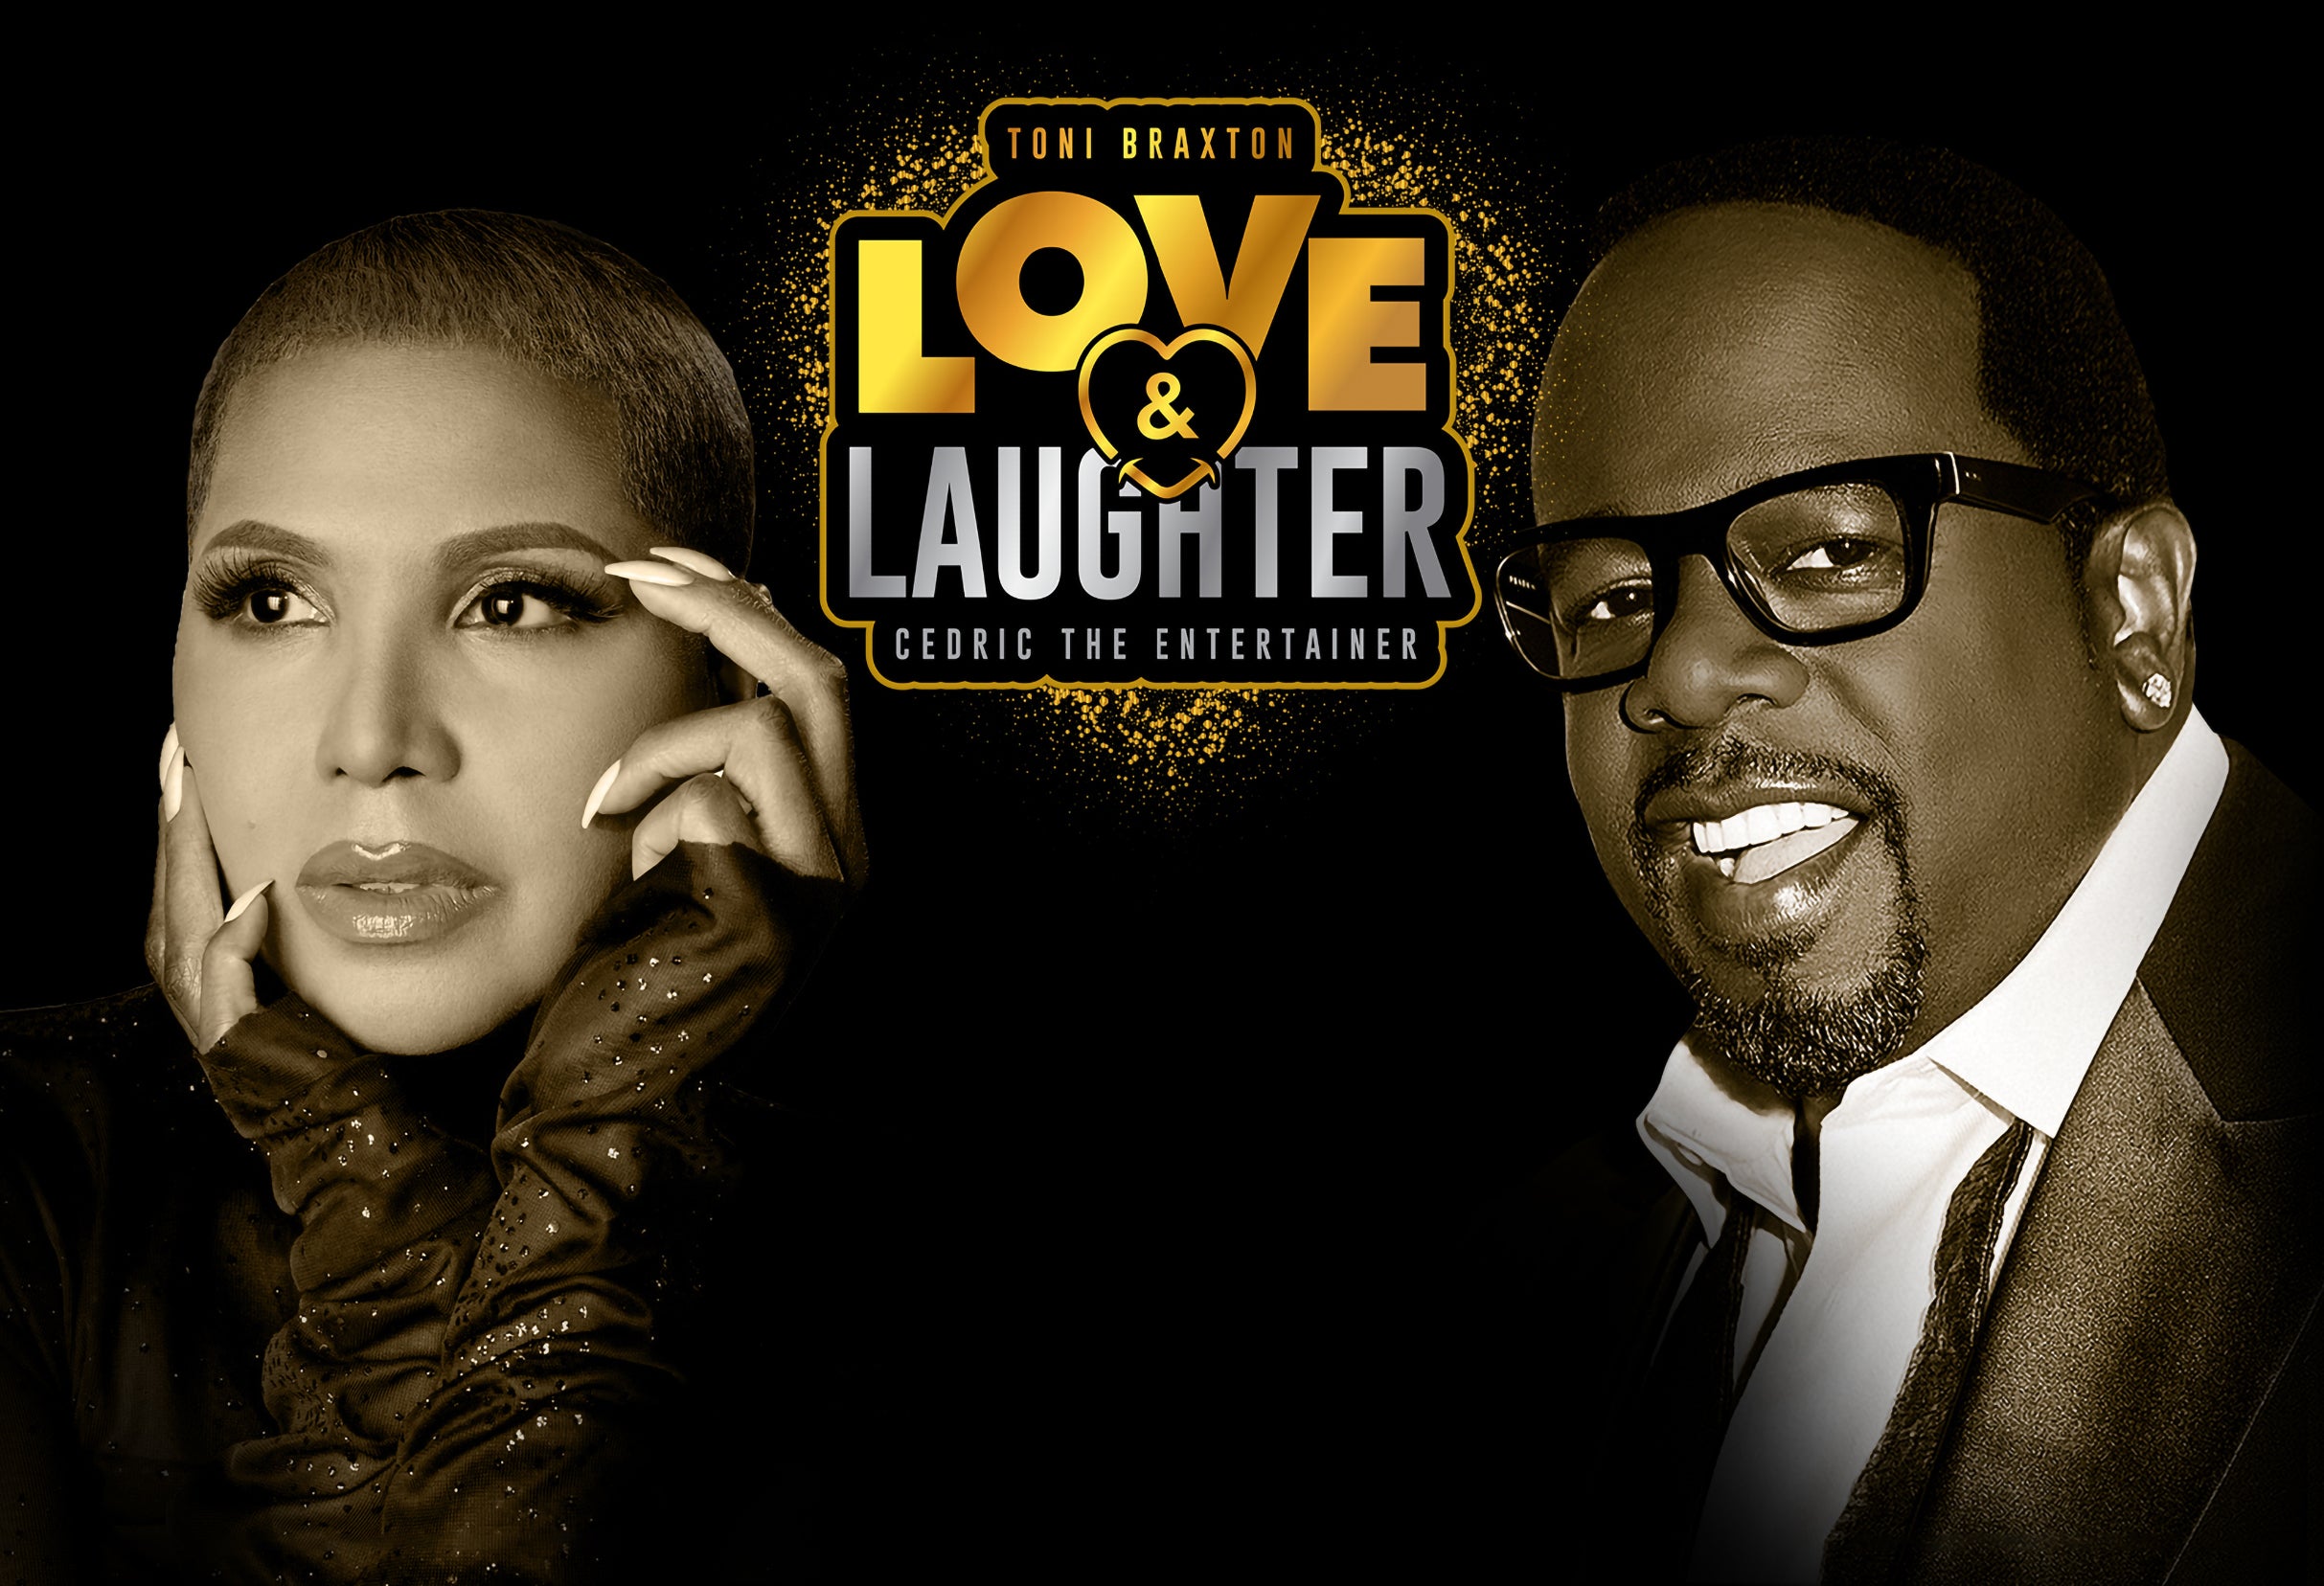 Love & Laughter: Toni Braxton & Cedric The Entertainer in Las Vegas promo photo for Official Platinum Onsale presale offer code